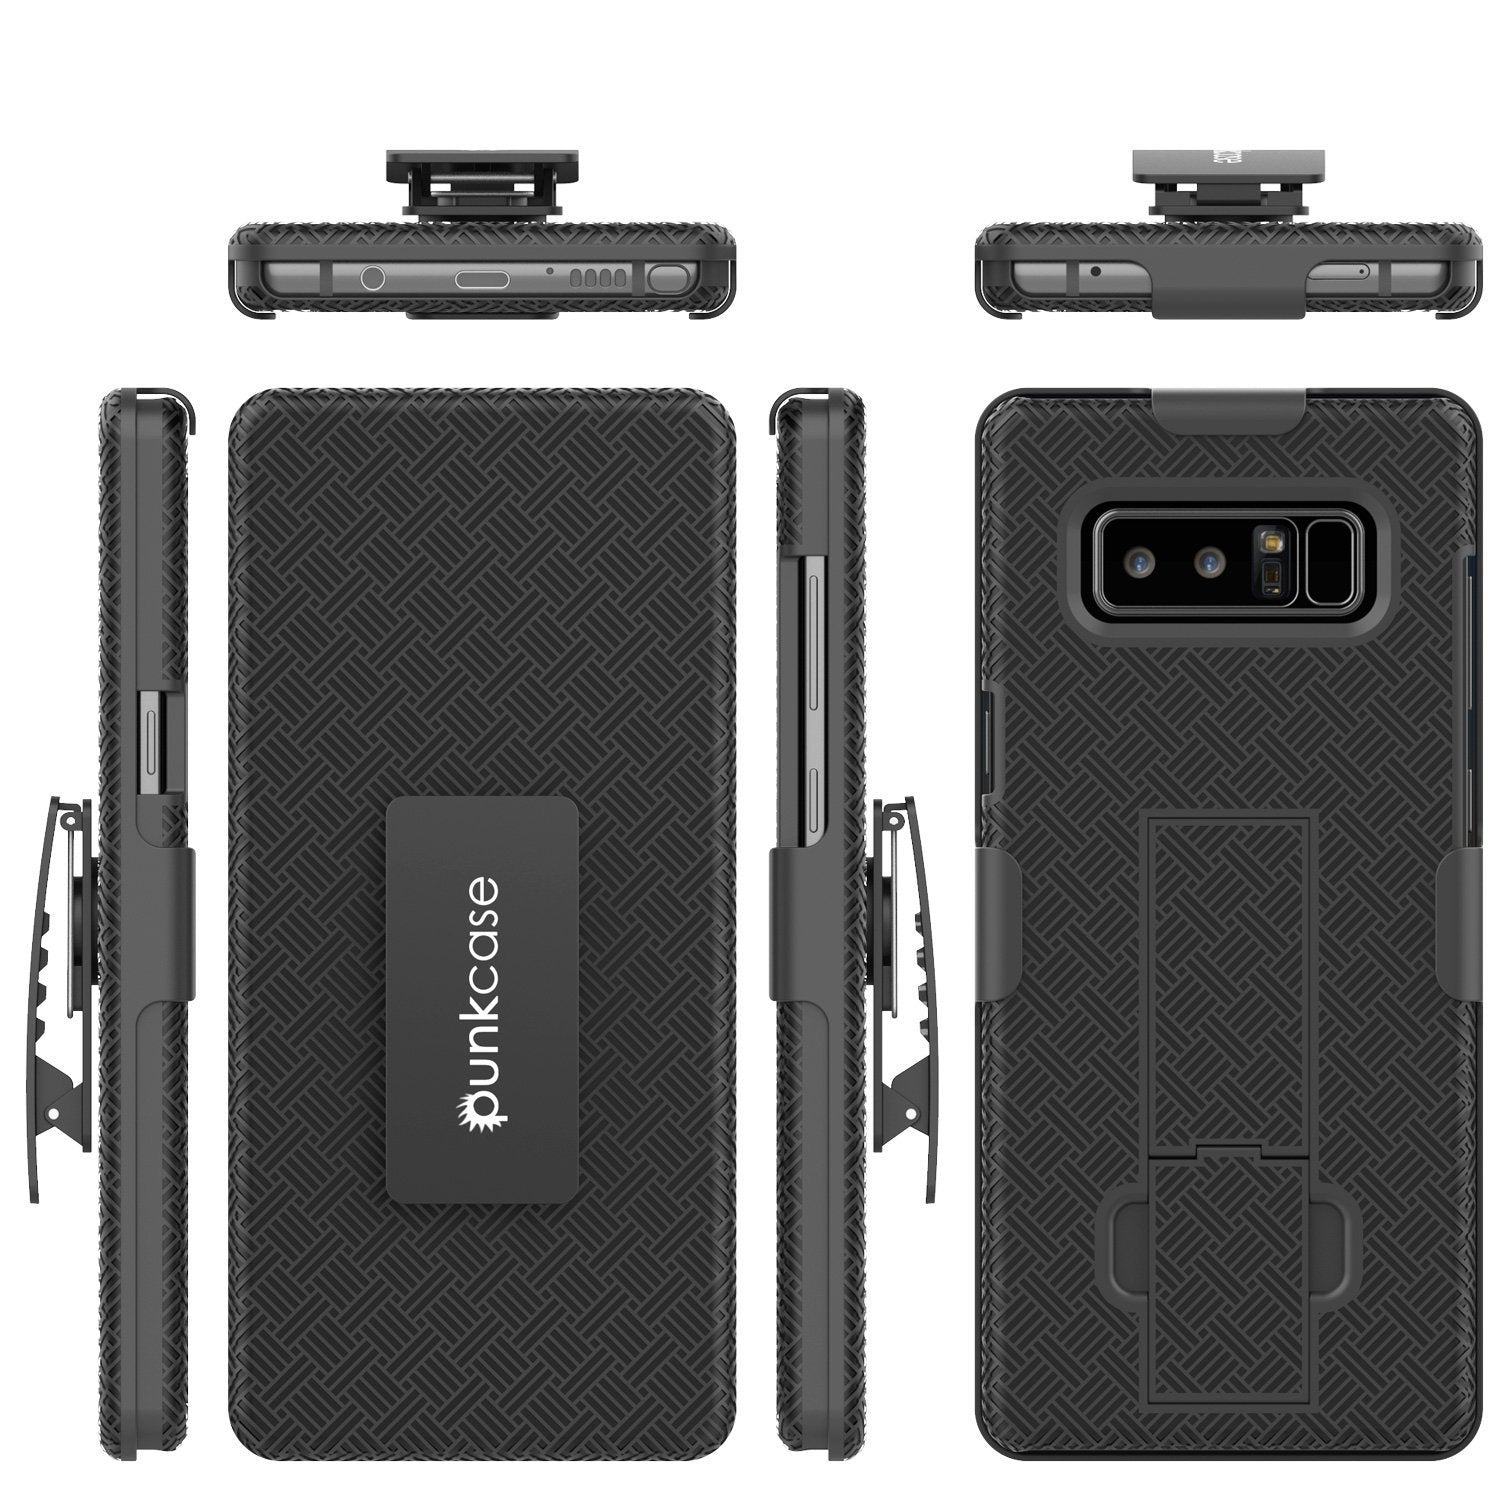 Punkcase Galaxy Note 8 Case, With PunkShield Glass Screen Protector, Holster Belt Clip & Built-In Kickstand Non-Slip Dual Layer Hybrid TPU Full Body Protection for Samsung Note 8 [Black] - PunkCase NZ